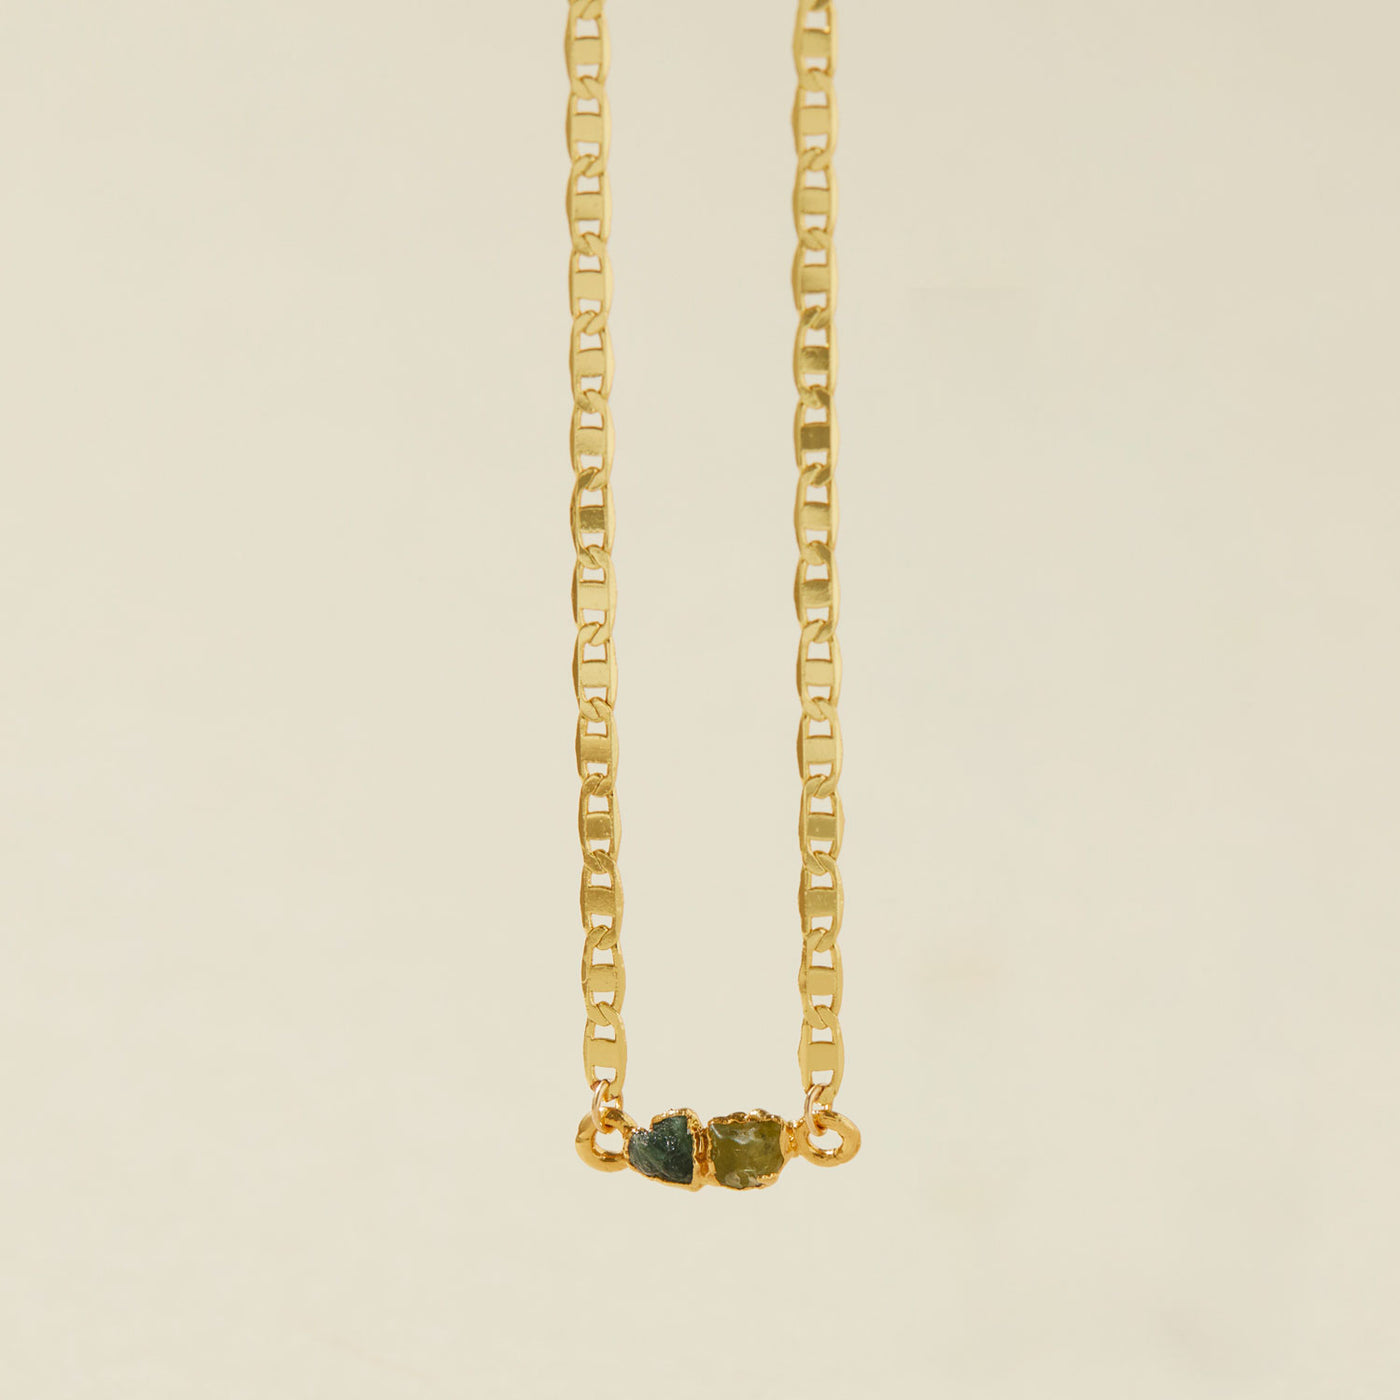 Emerald and Peridot Necklace - SS01